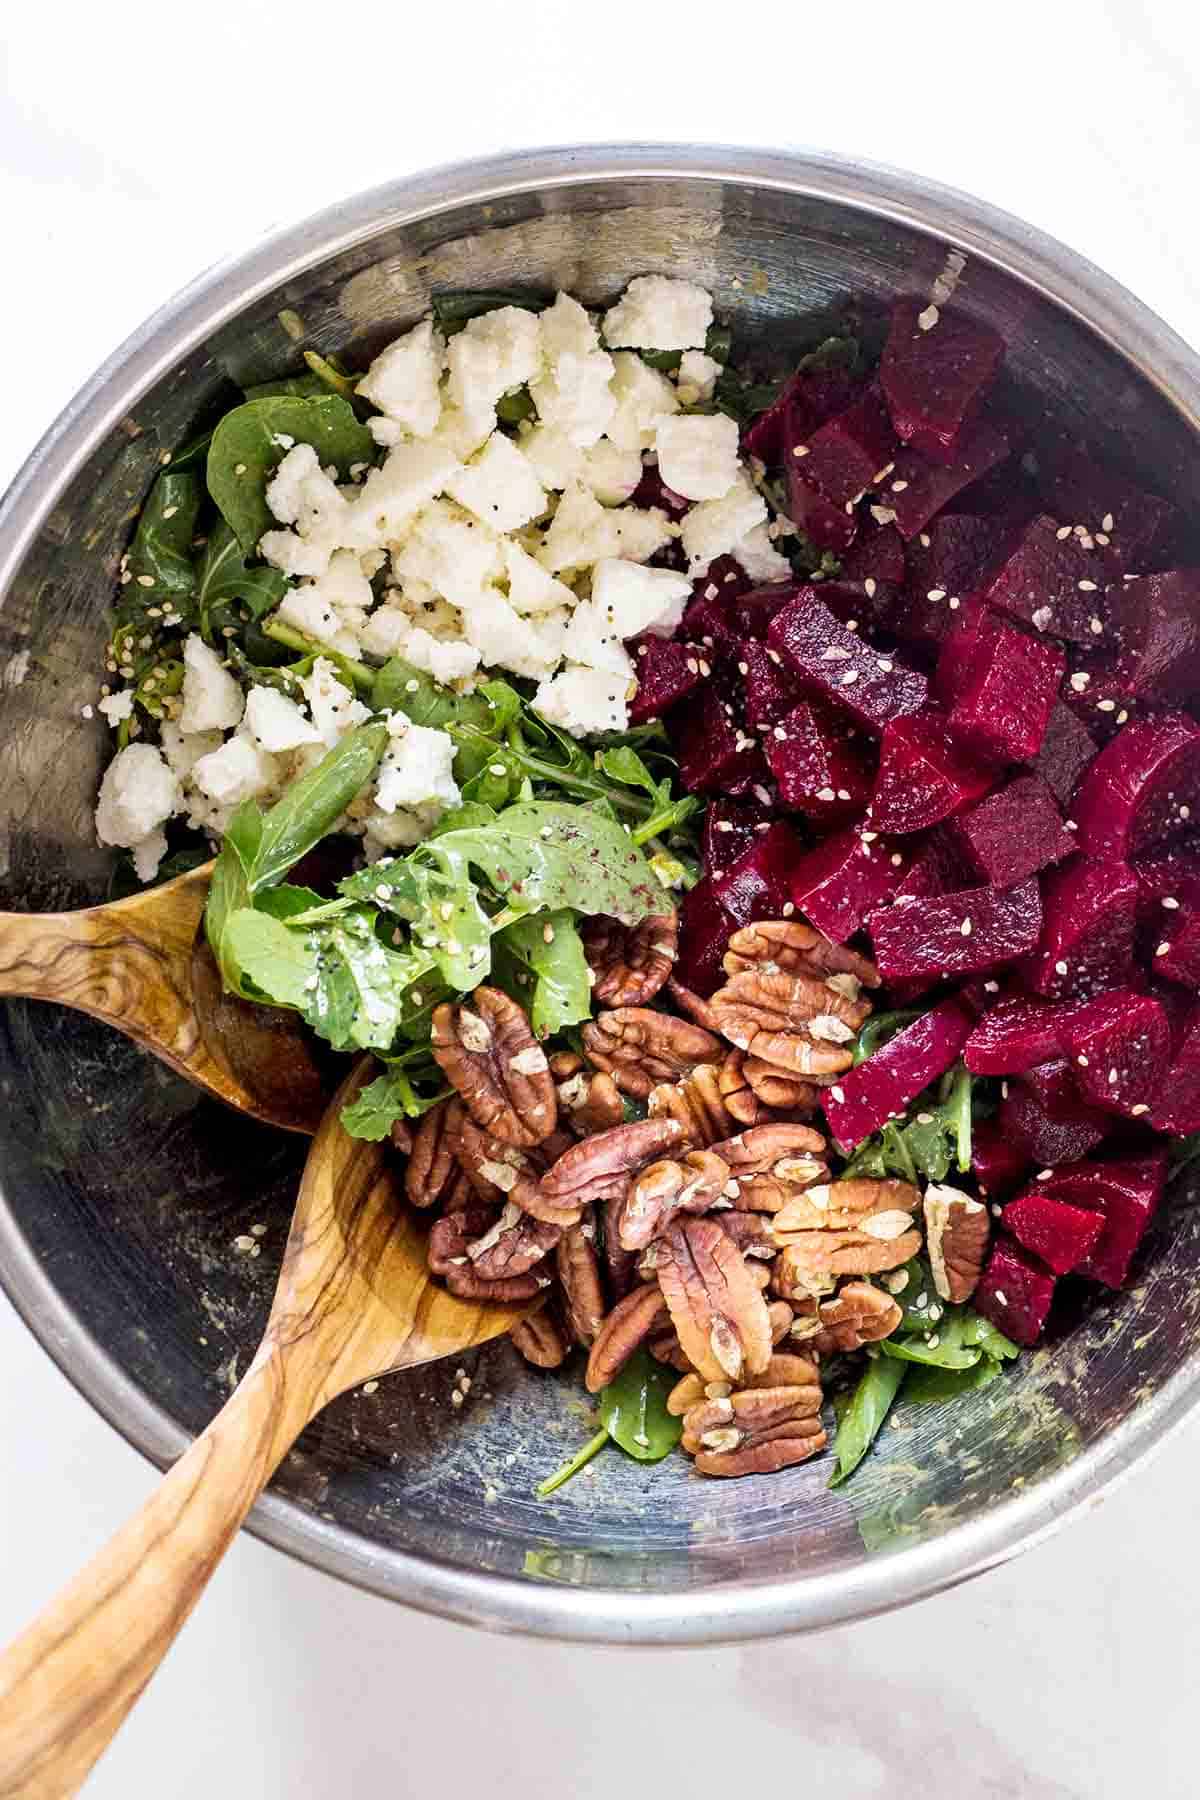 arugula beet salad ingredients in one large bowl with 2 wooden serving utensils